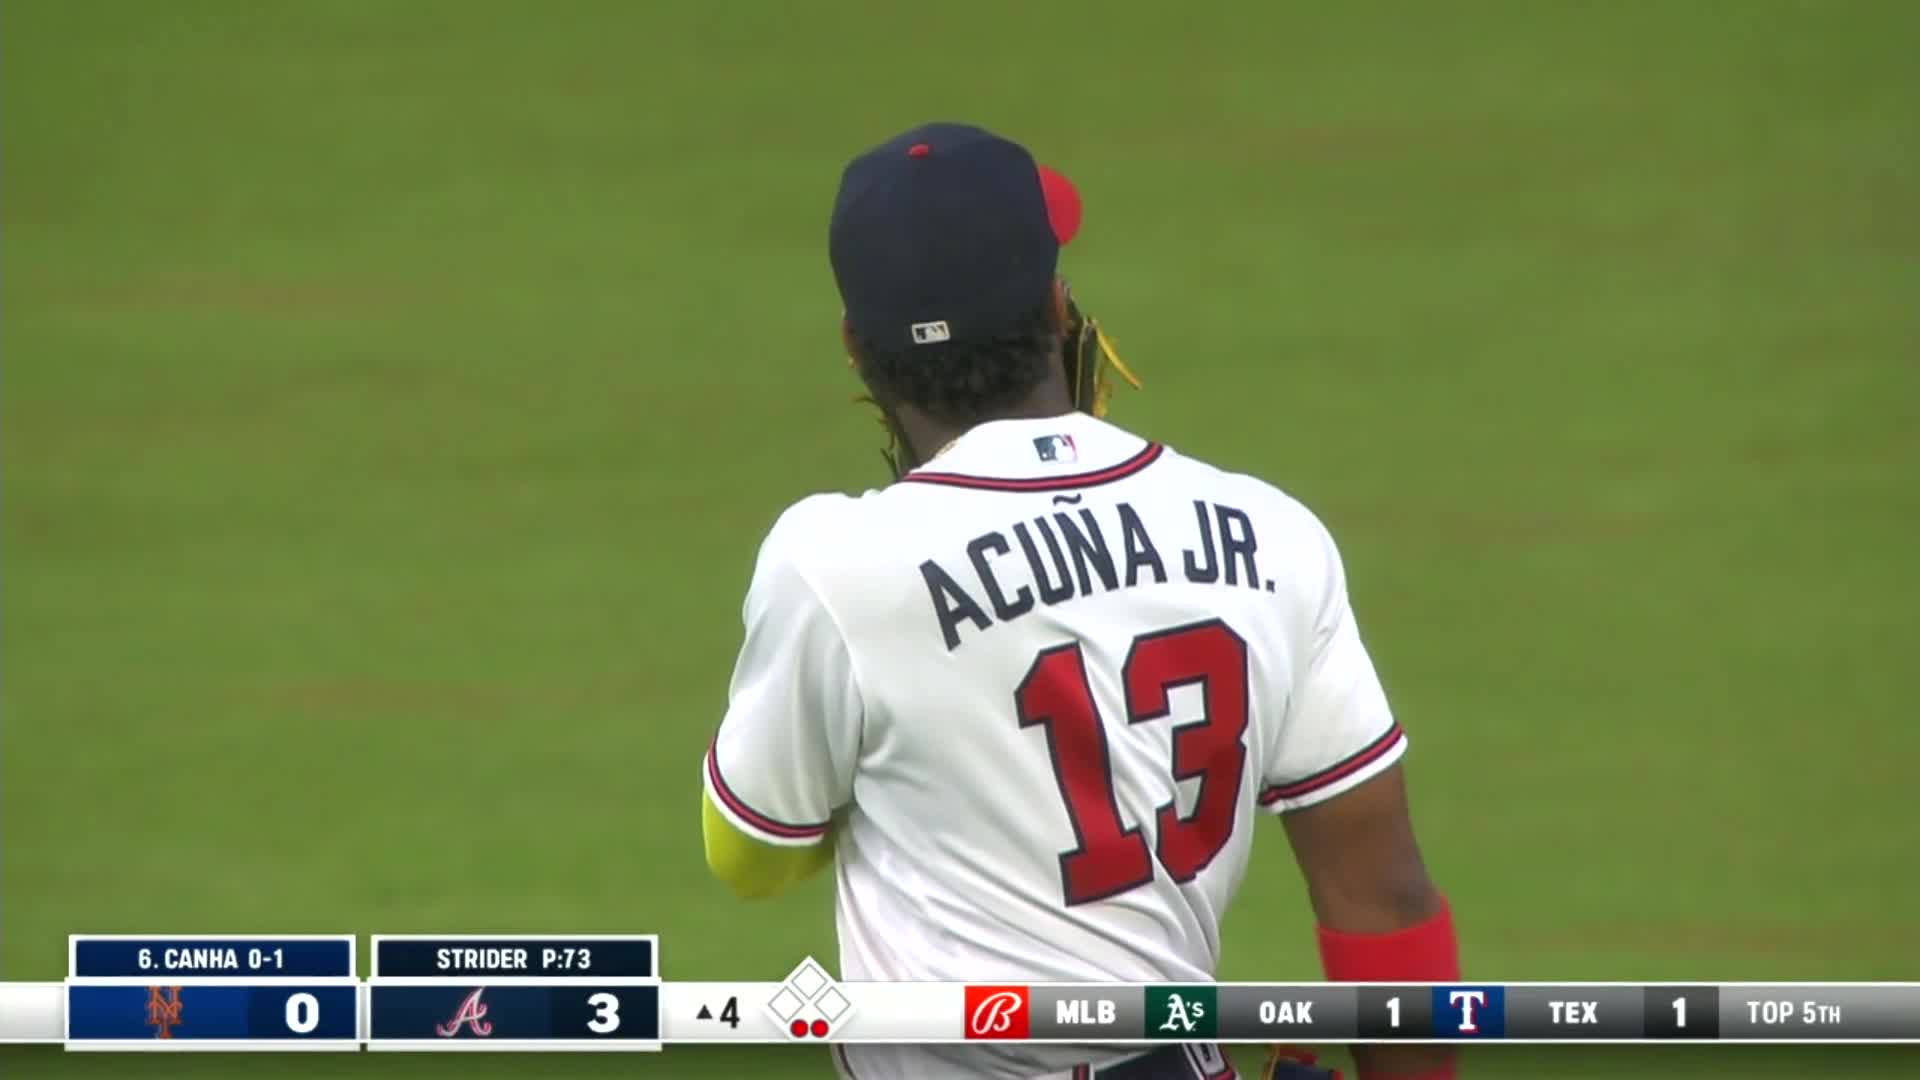 Ronald Acuña Jr. throws the ball in the stands with only two outs,  thankfully no one was on base. : r/baseball